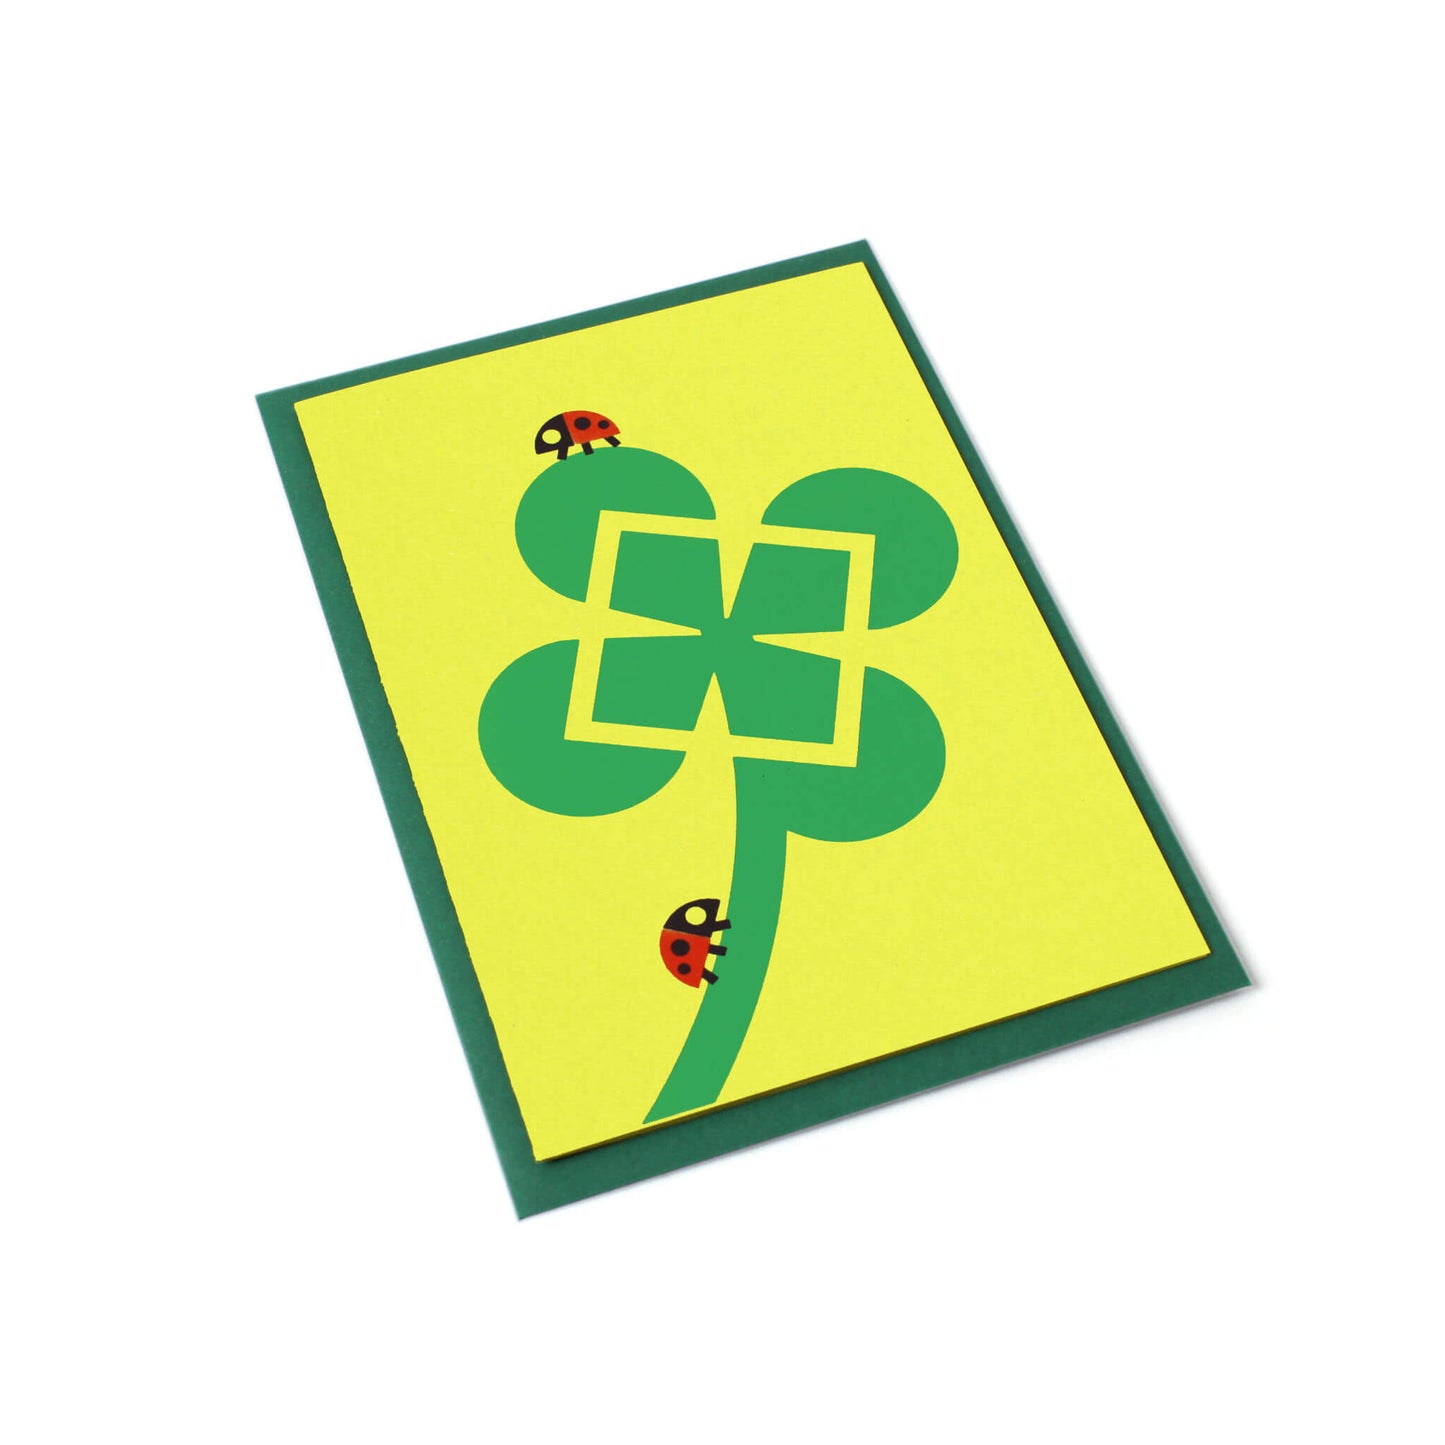 A tilted green greeting card with an illustration of a four-leaf clover and two ladybugs. Behind the card, there's a dark green envelope.